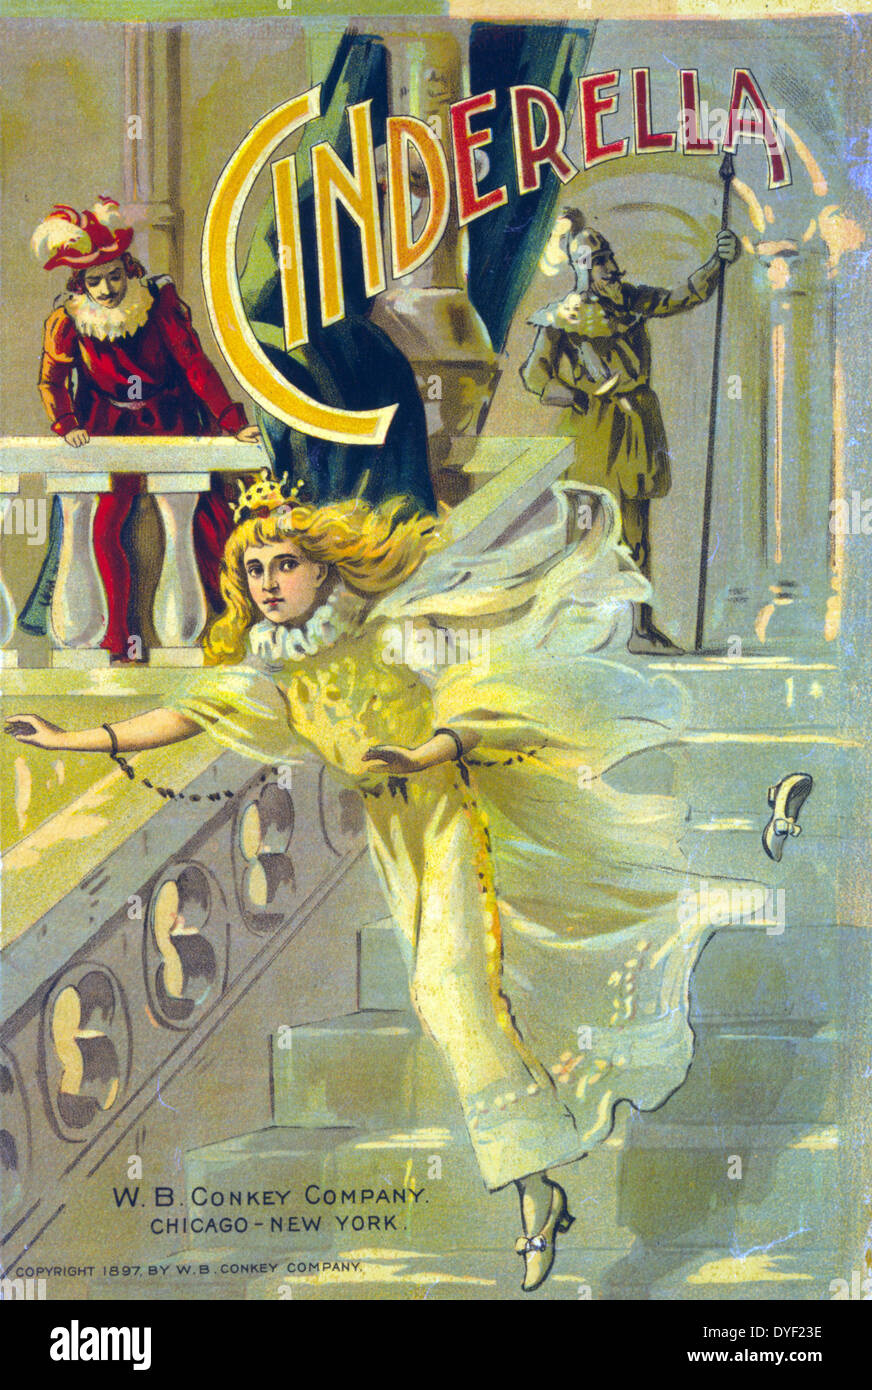 Cinderella Published: c1897. Illustration for cover of children's book, 'Cinderella,' showing Cinderella running down steps, dropping her slipper. Stock Photo